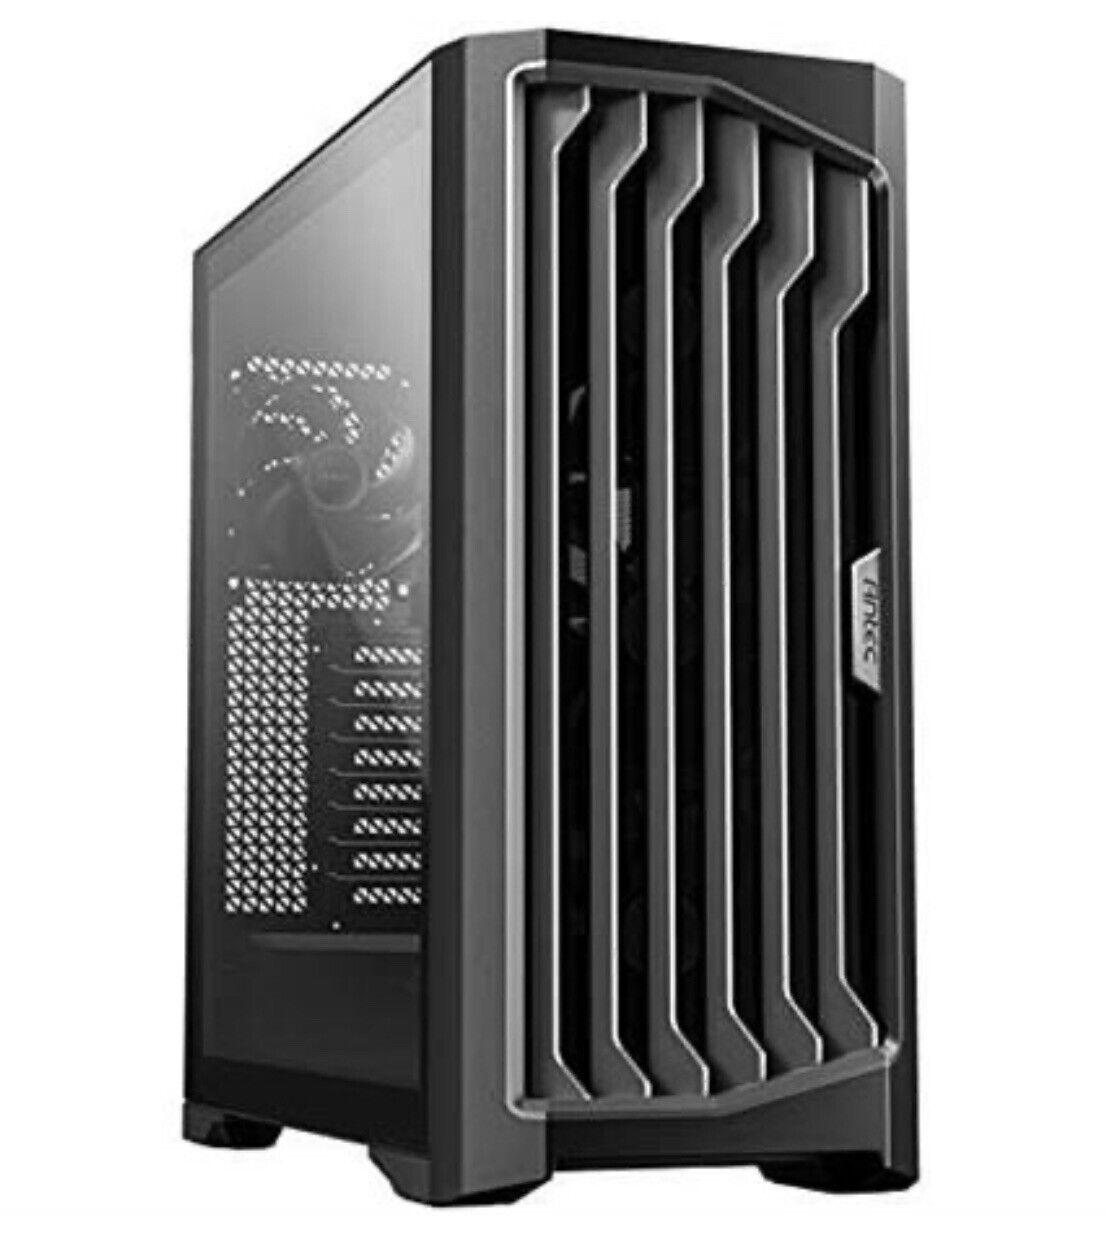 Brand NEW Full Gaming Antec Computer Tower